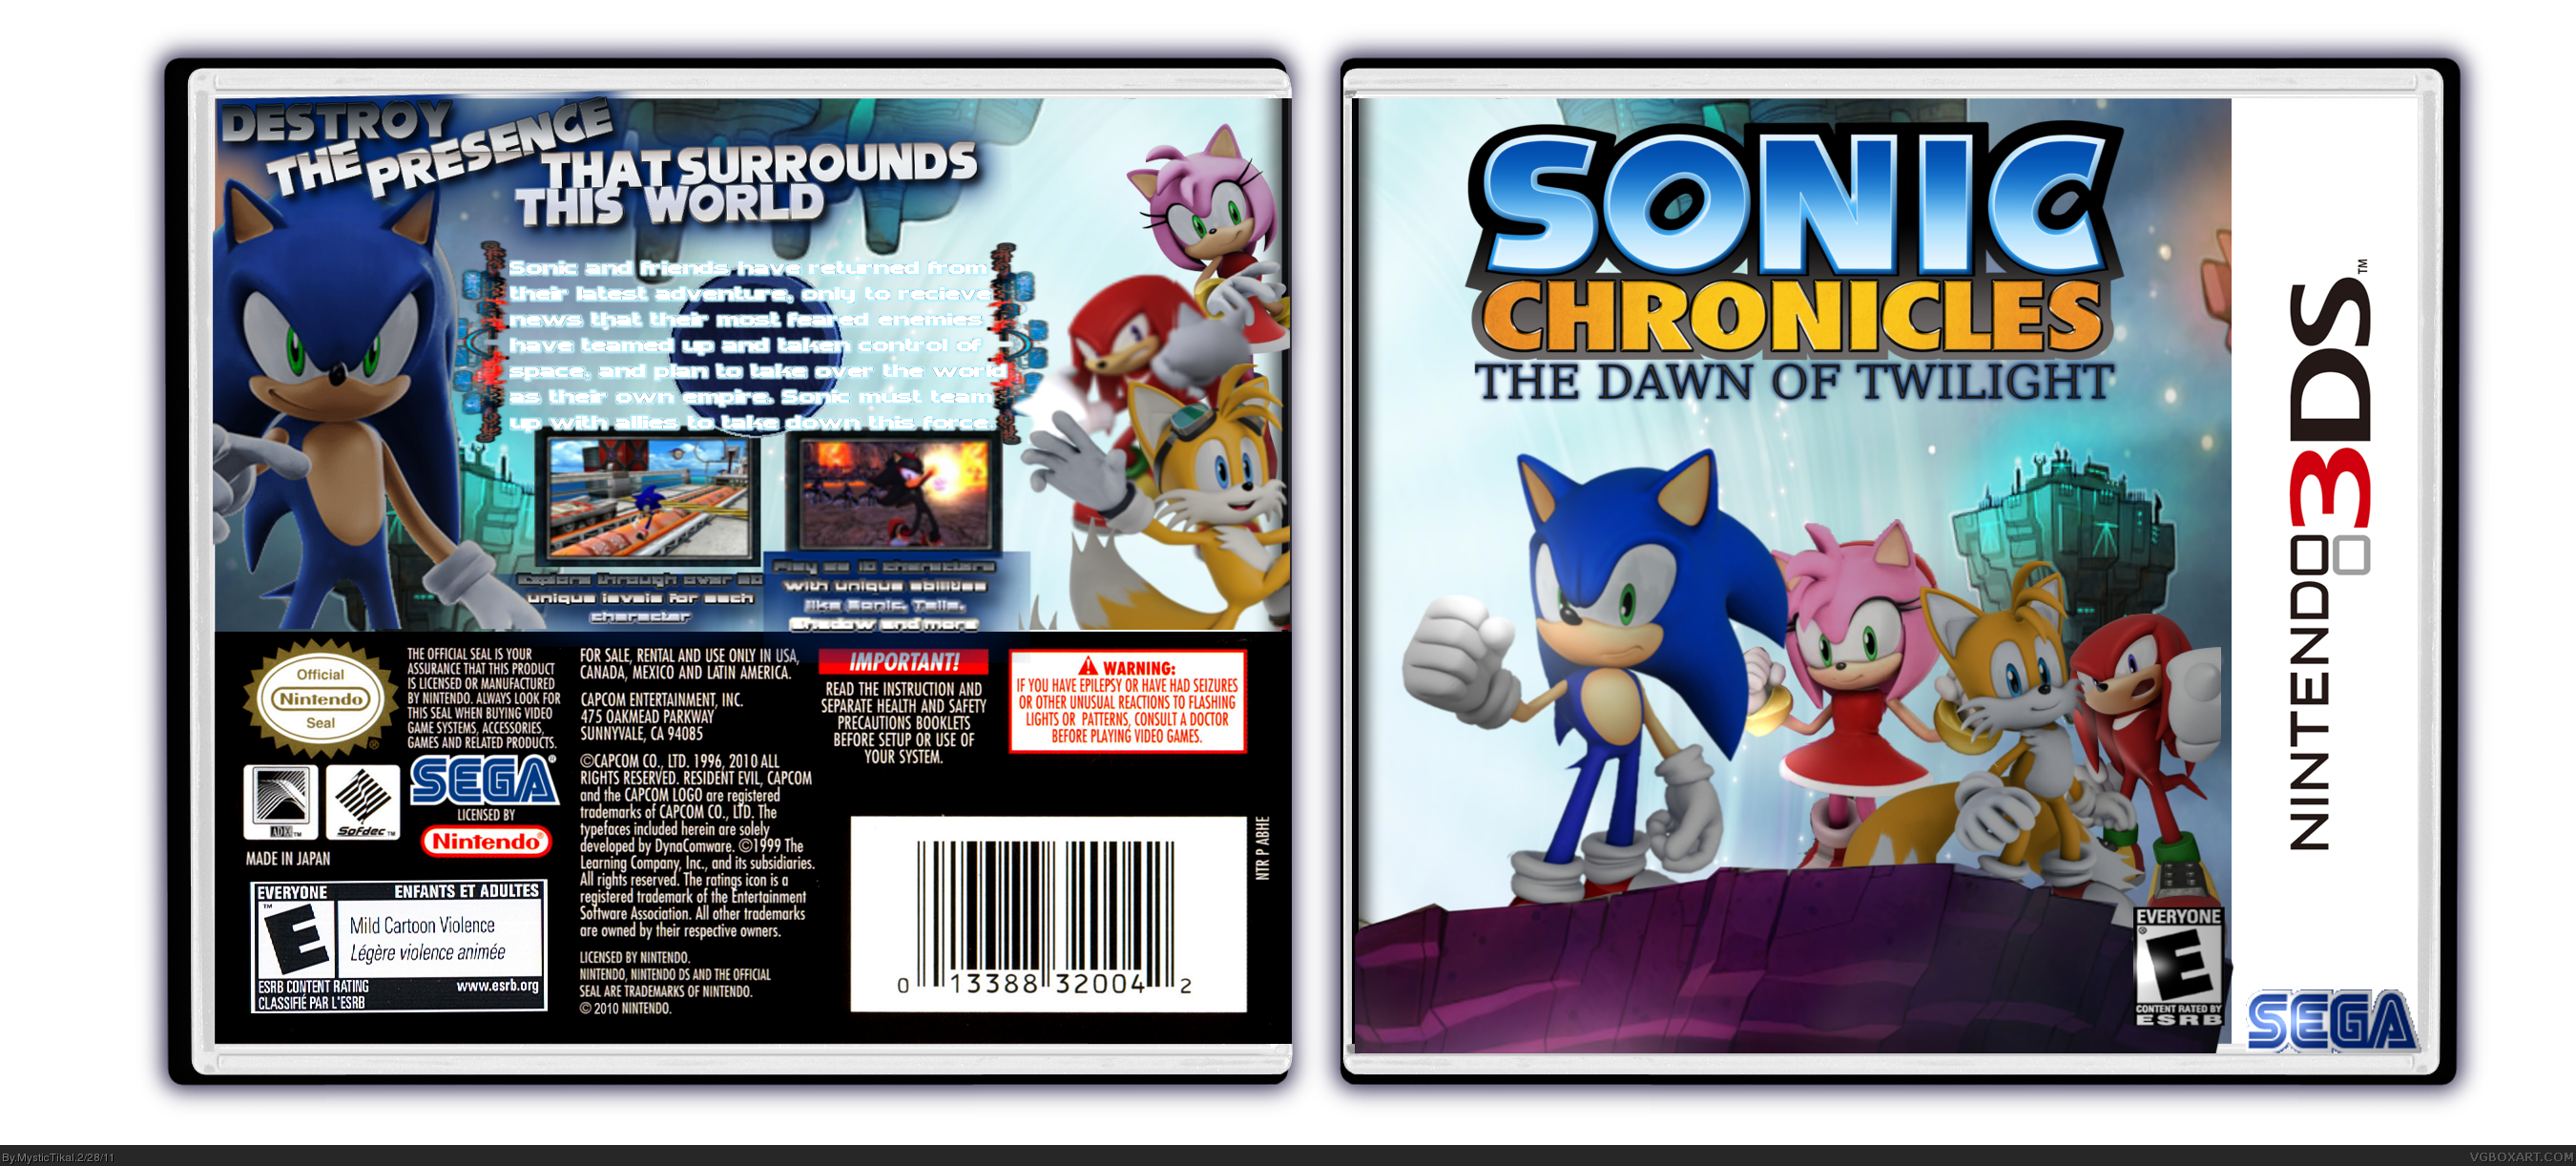 Sonic Chronicles: The Dawn of Twilight box cover